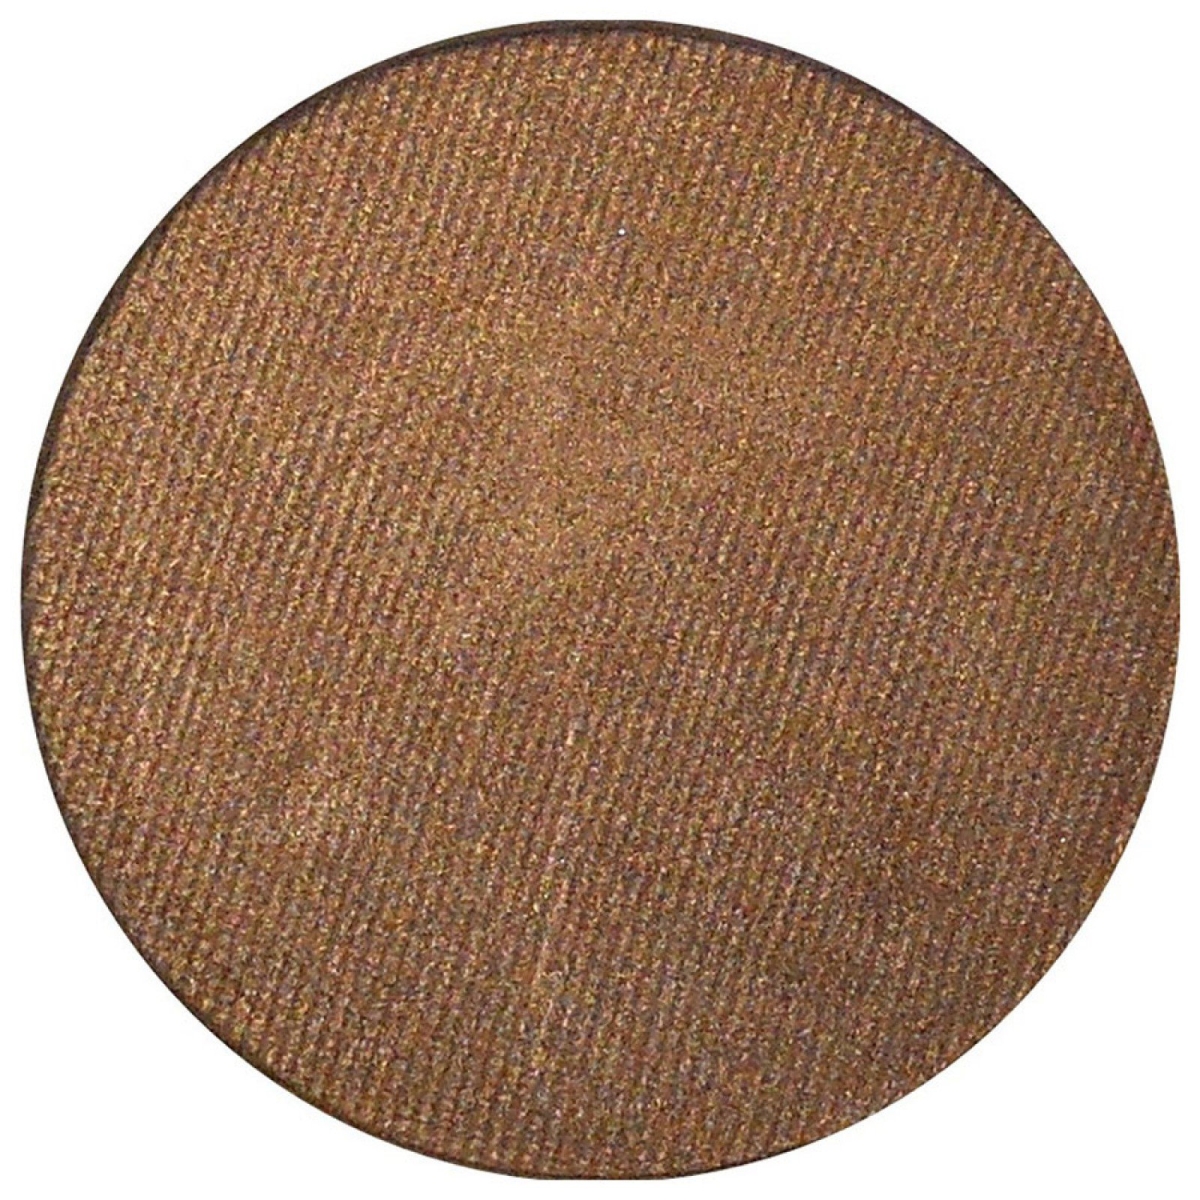 227610 0.045 Oz Natural Cosmetics Cairo, Medium Plum Brown With Light Shimmer Pressed Mineral Eye Shadows